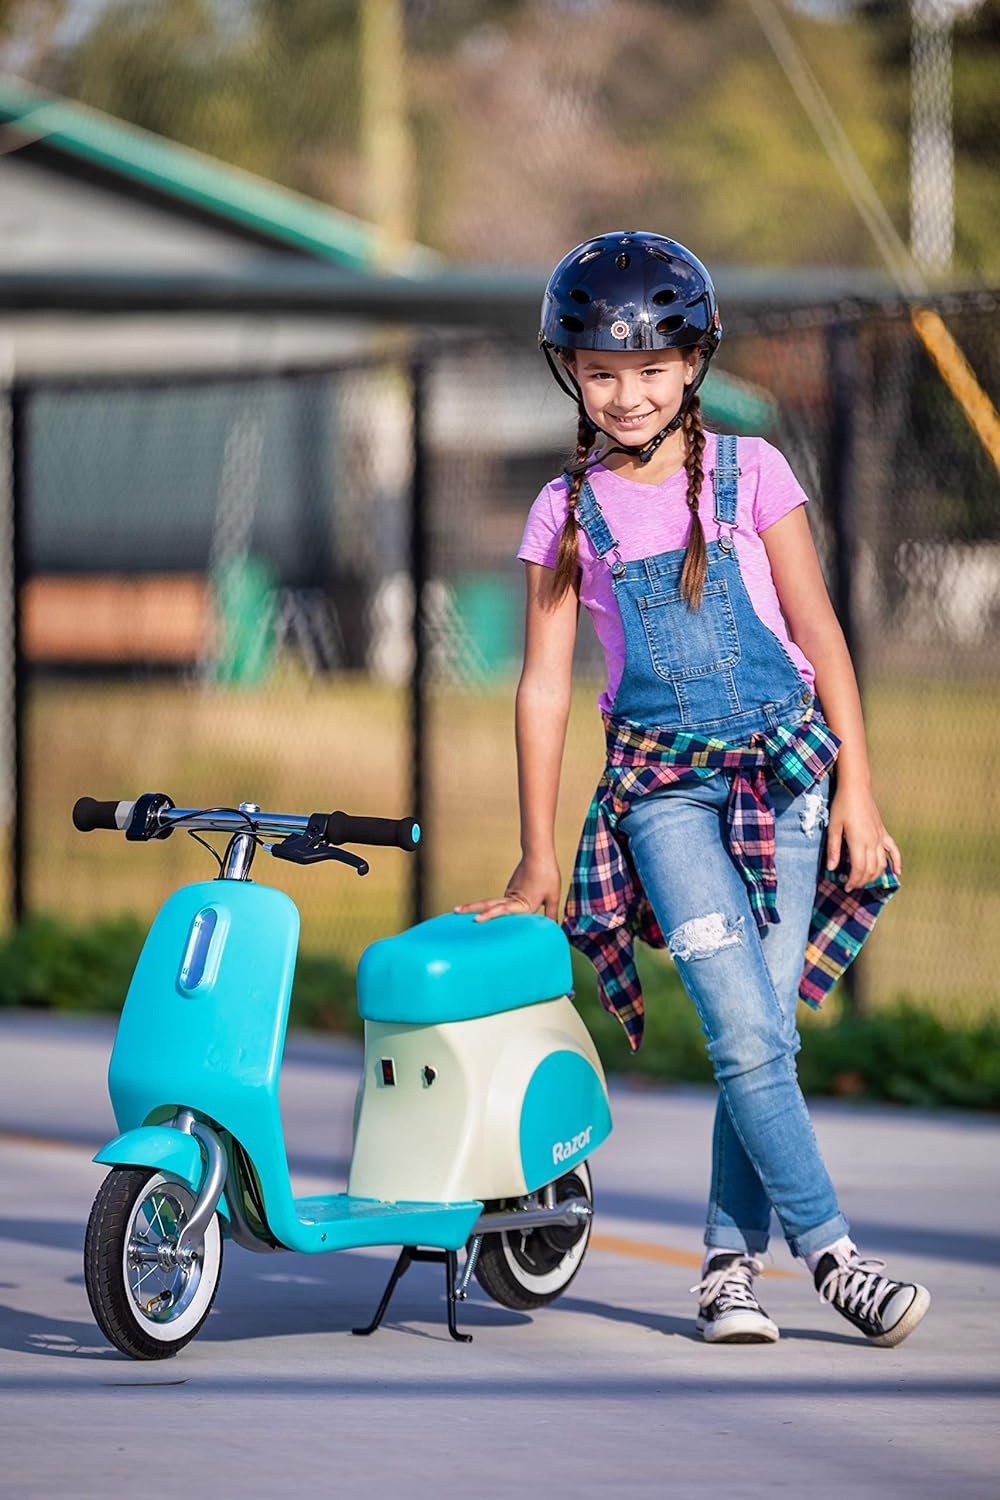 Razor Pocket Mod Petite - 12V Miniature Euro-Style Electric Scooter for Ages 7+, 100-watt Motor, Up to 40 min Ride Time, For Riders up to 110 lbs, Blue